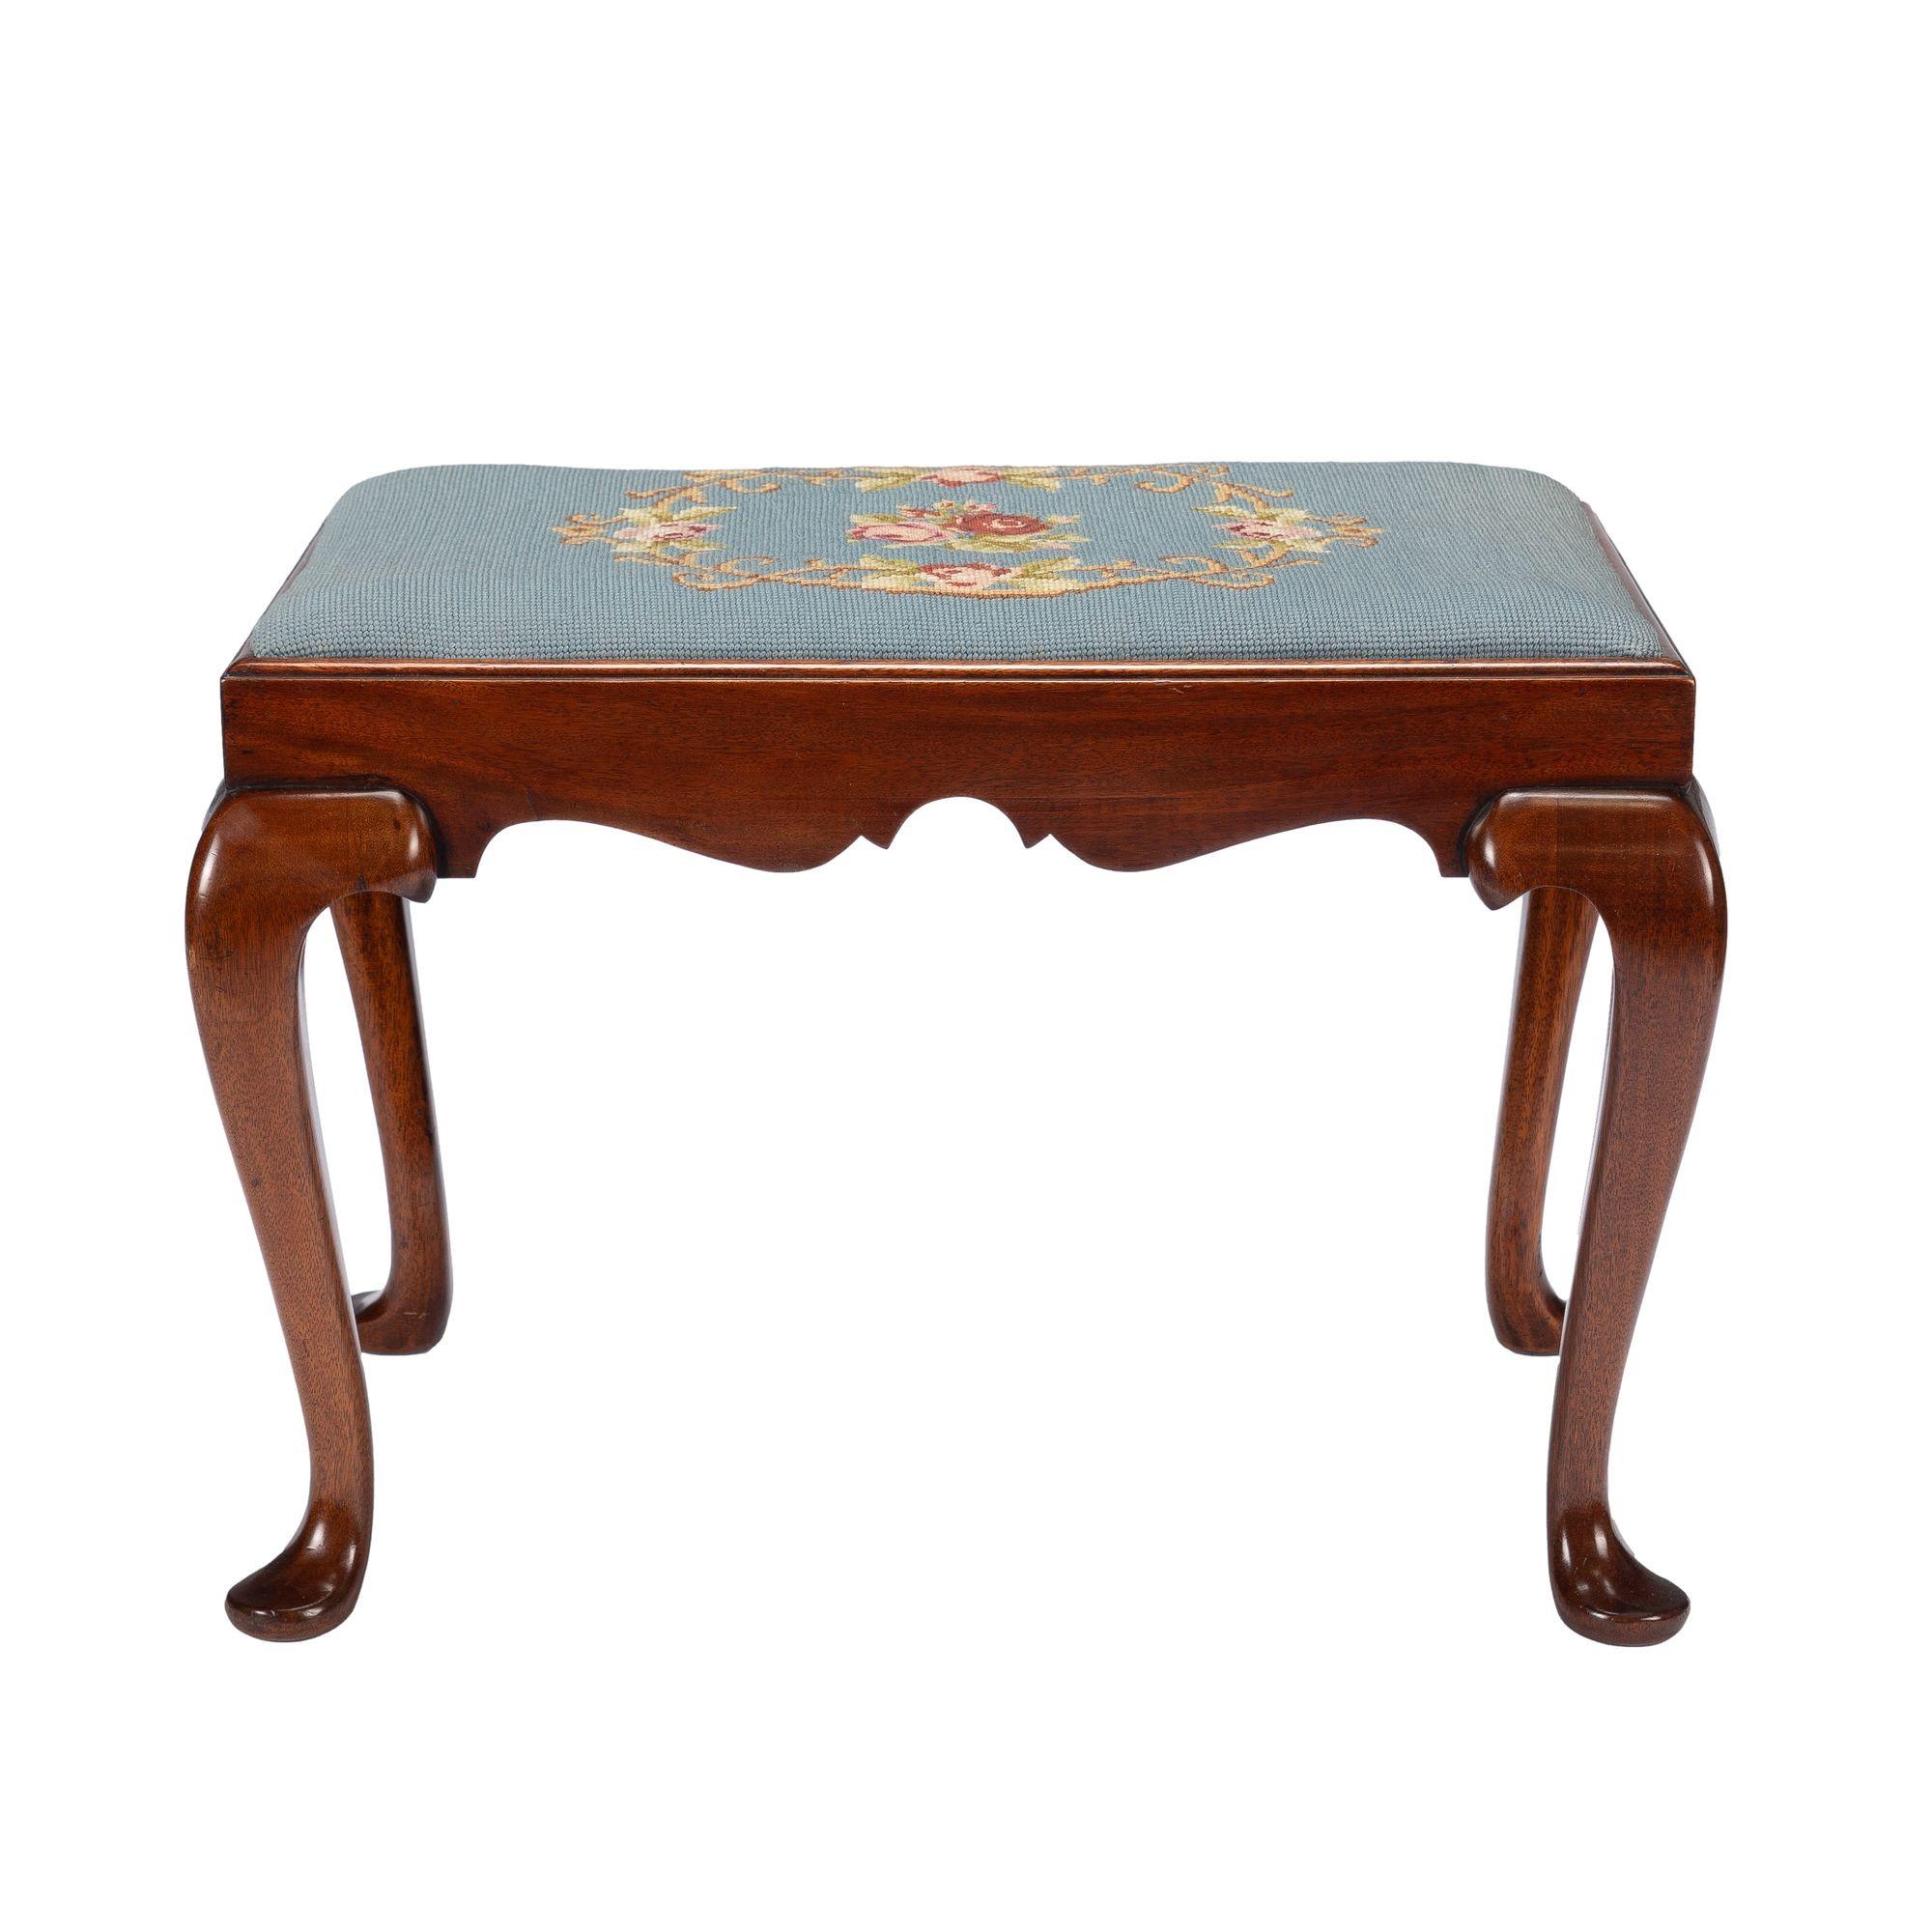 Academic Revival Queen Anne style mahogany bench/stool with upholstered slip seat seat. The cabriole legs flow in a sinuous line from the bowed knee through the rounded and tapered legs which terminate in a flaring pad foot. The legs are morticed